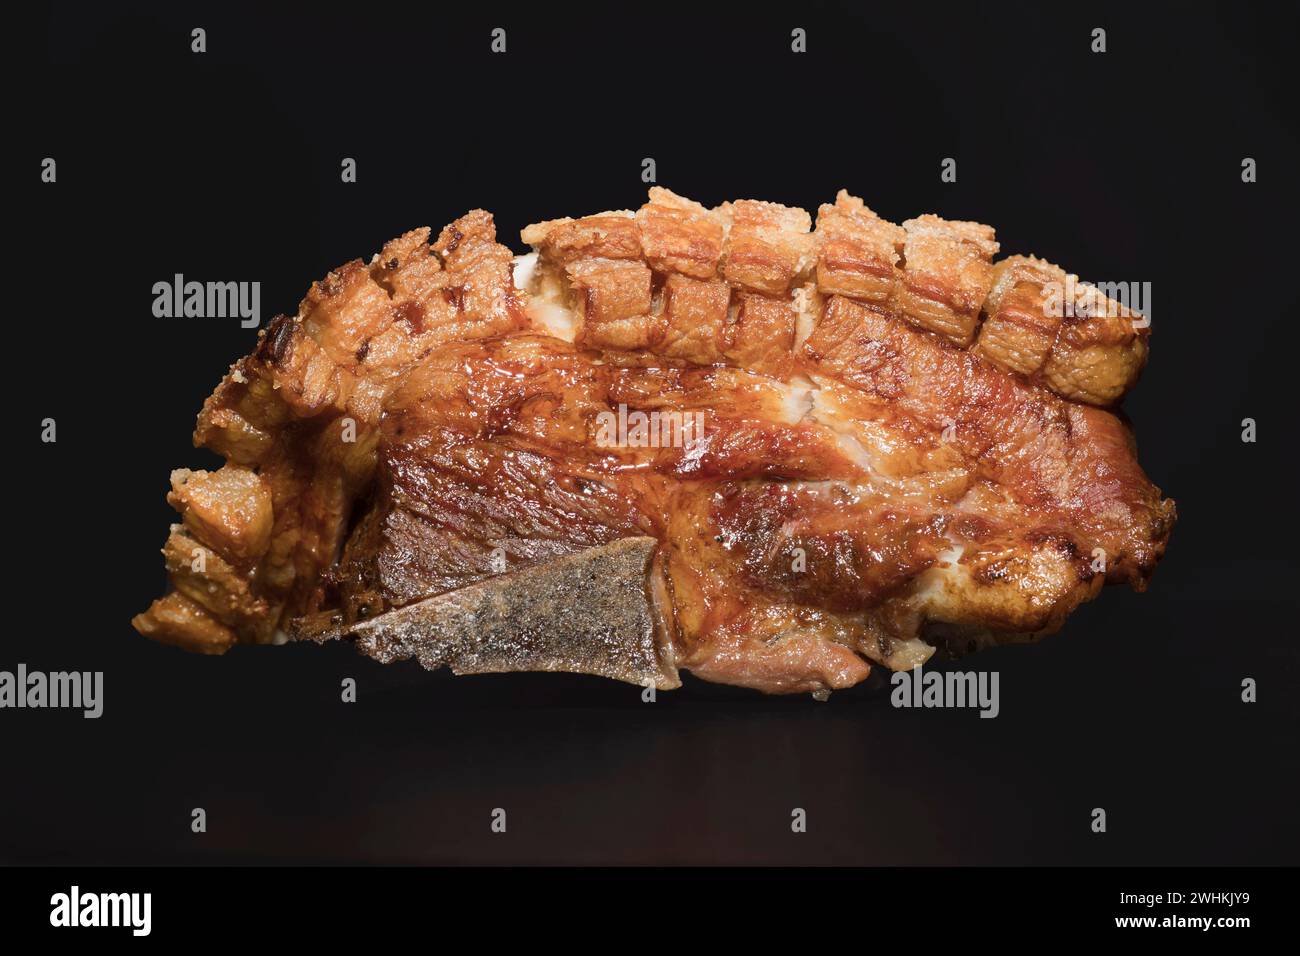 Freshly roasted pork belly with bone and crispy crust, food photography with black background Stock Photo